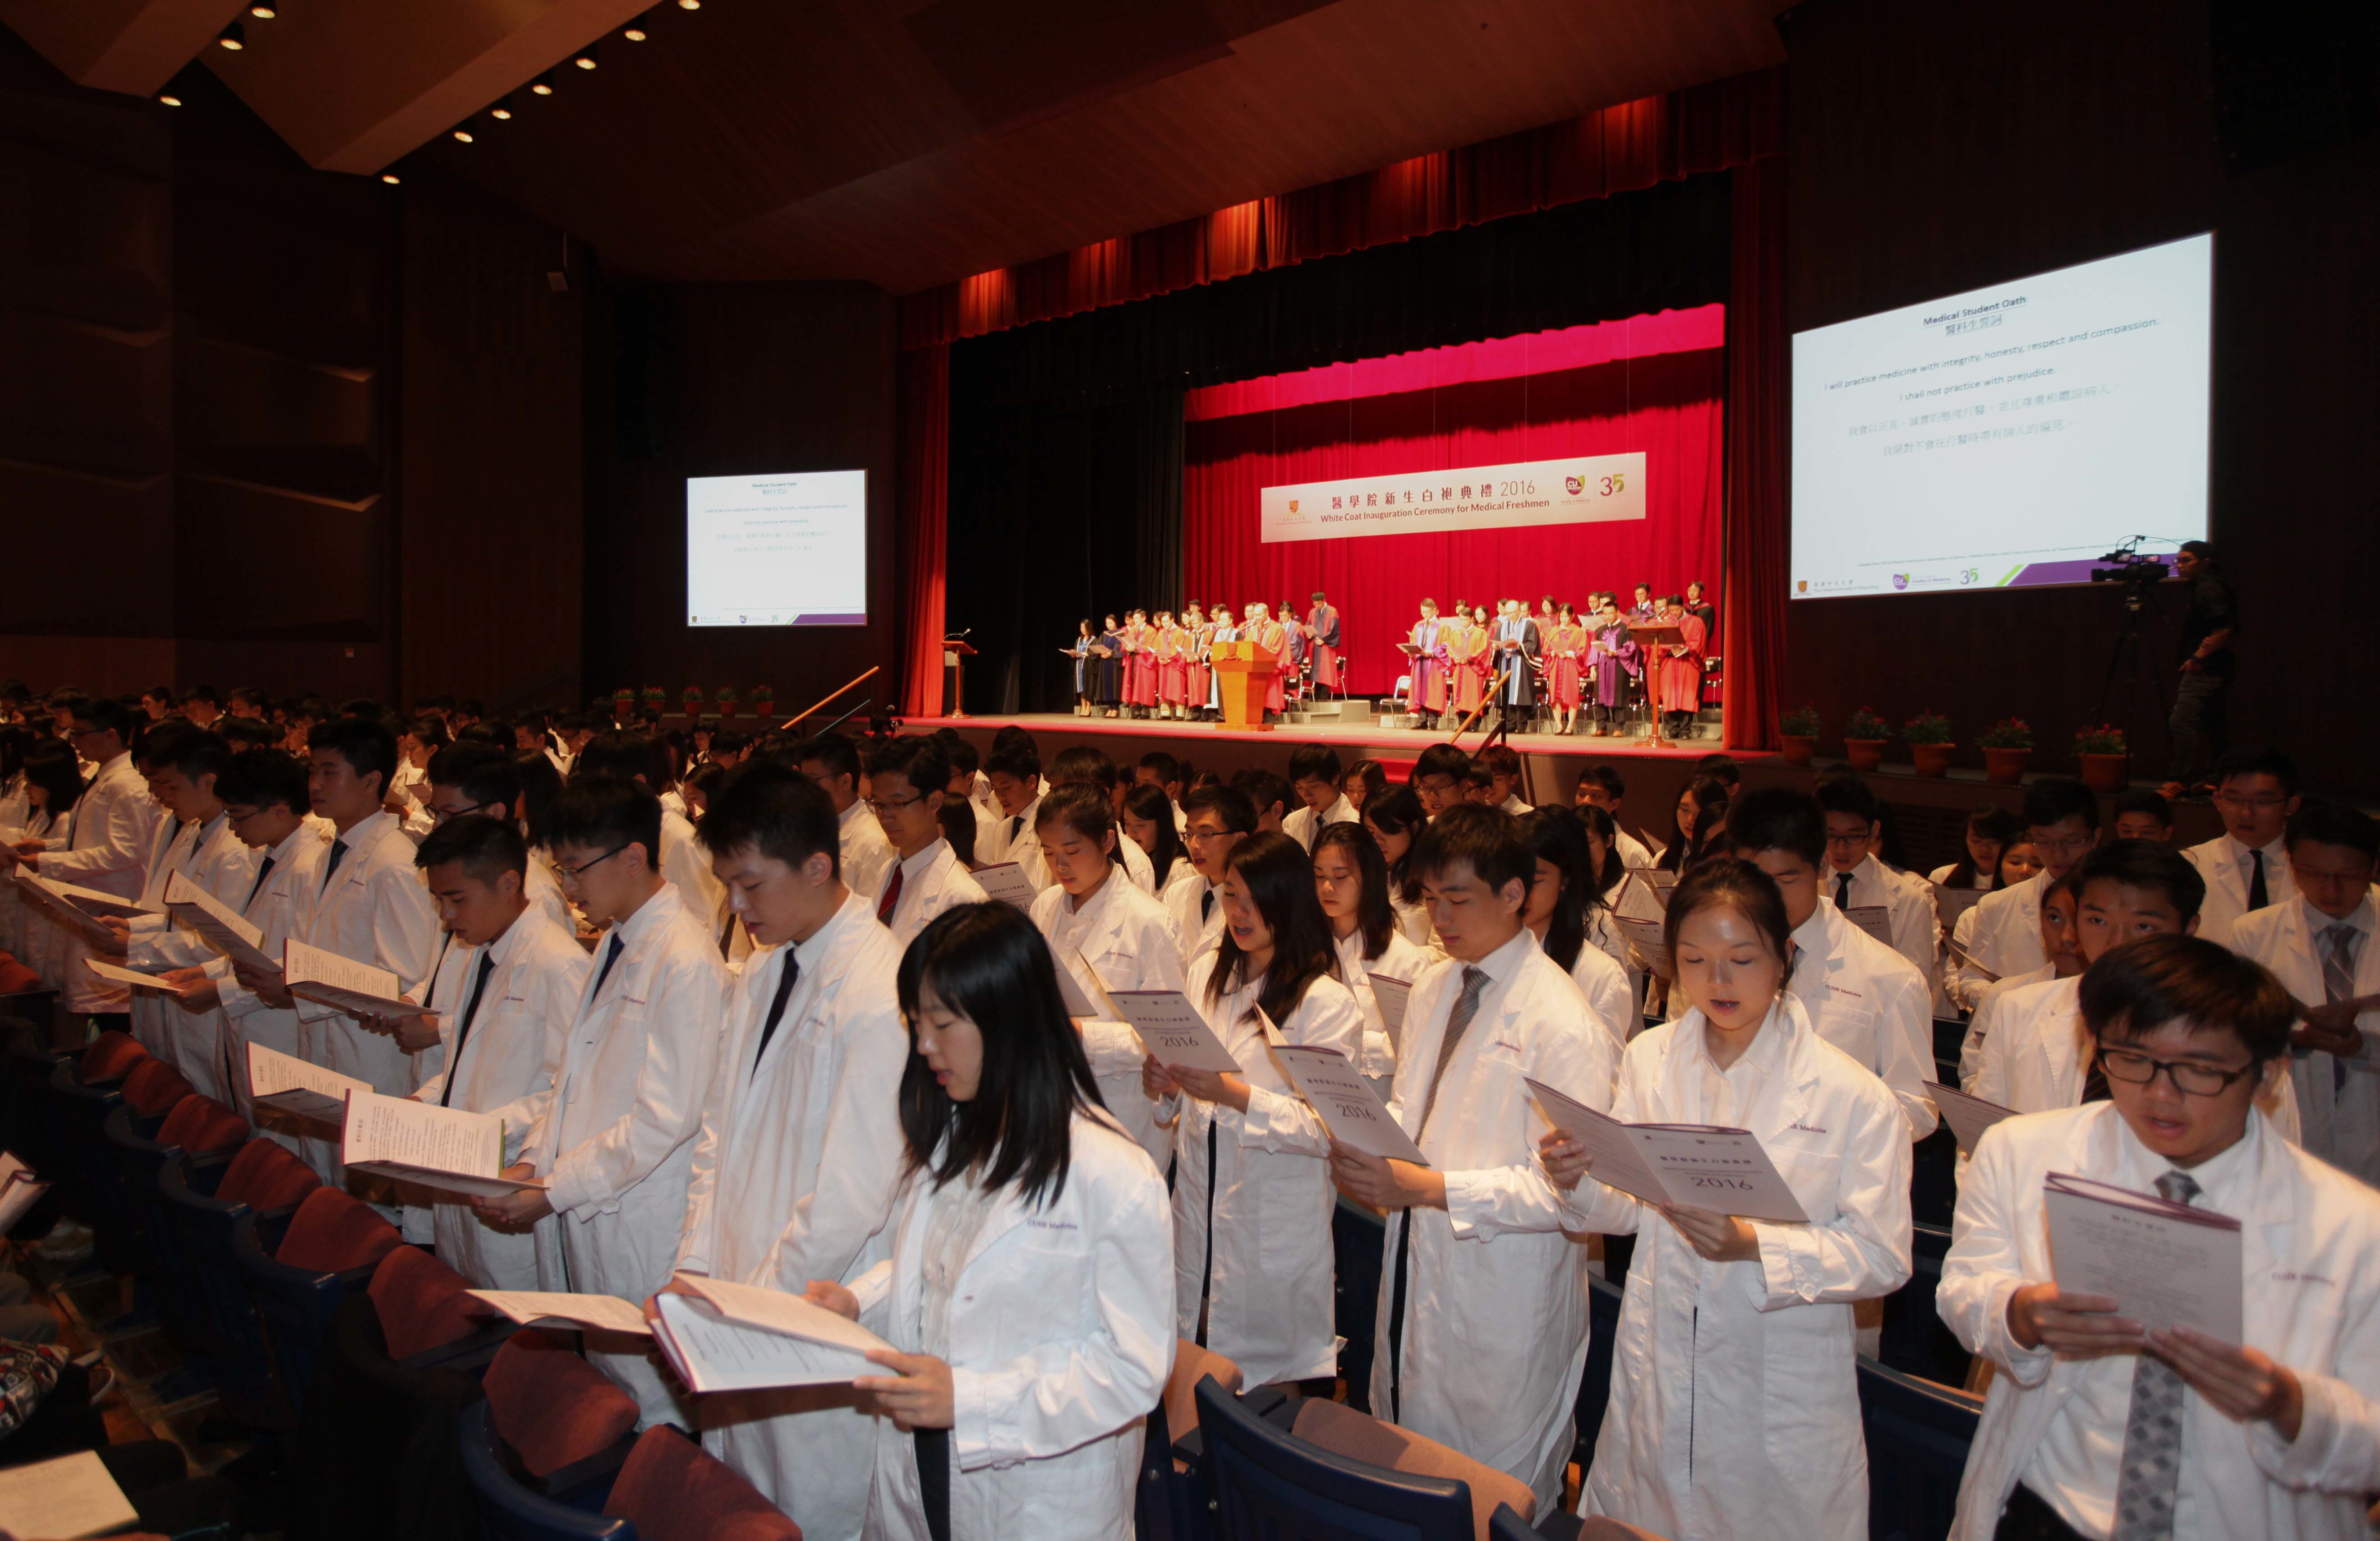 All medical freshmen pledge in the ceremony to commit to maintaining the highest standards of professional conduct to care for the patients, and contribute to society.